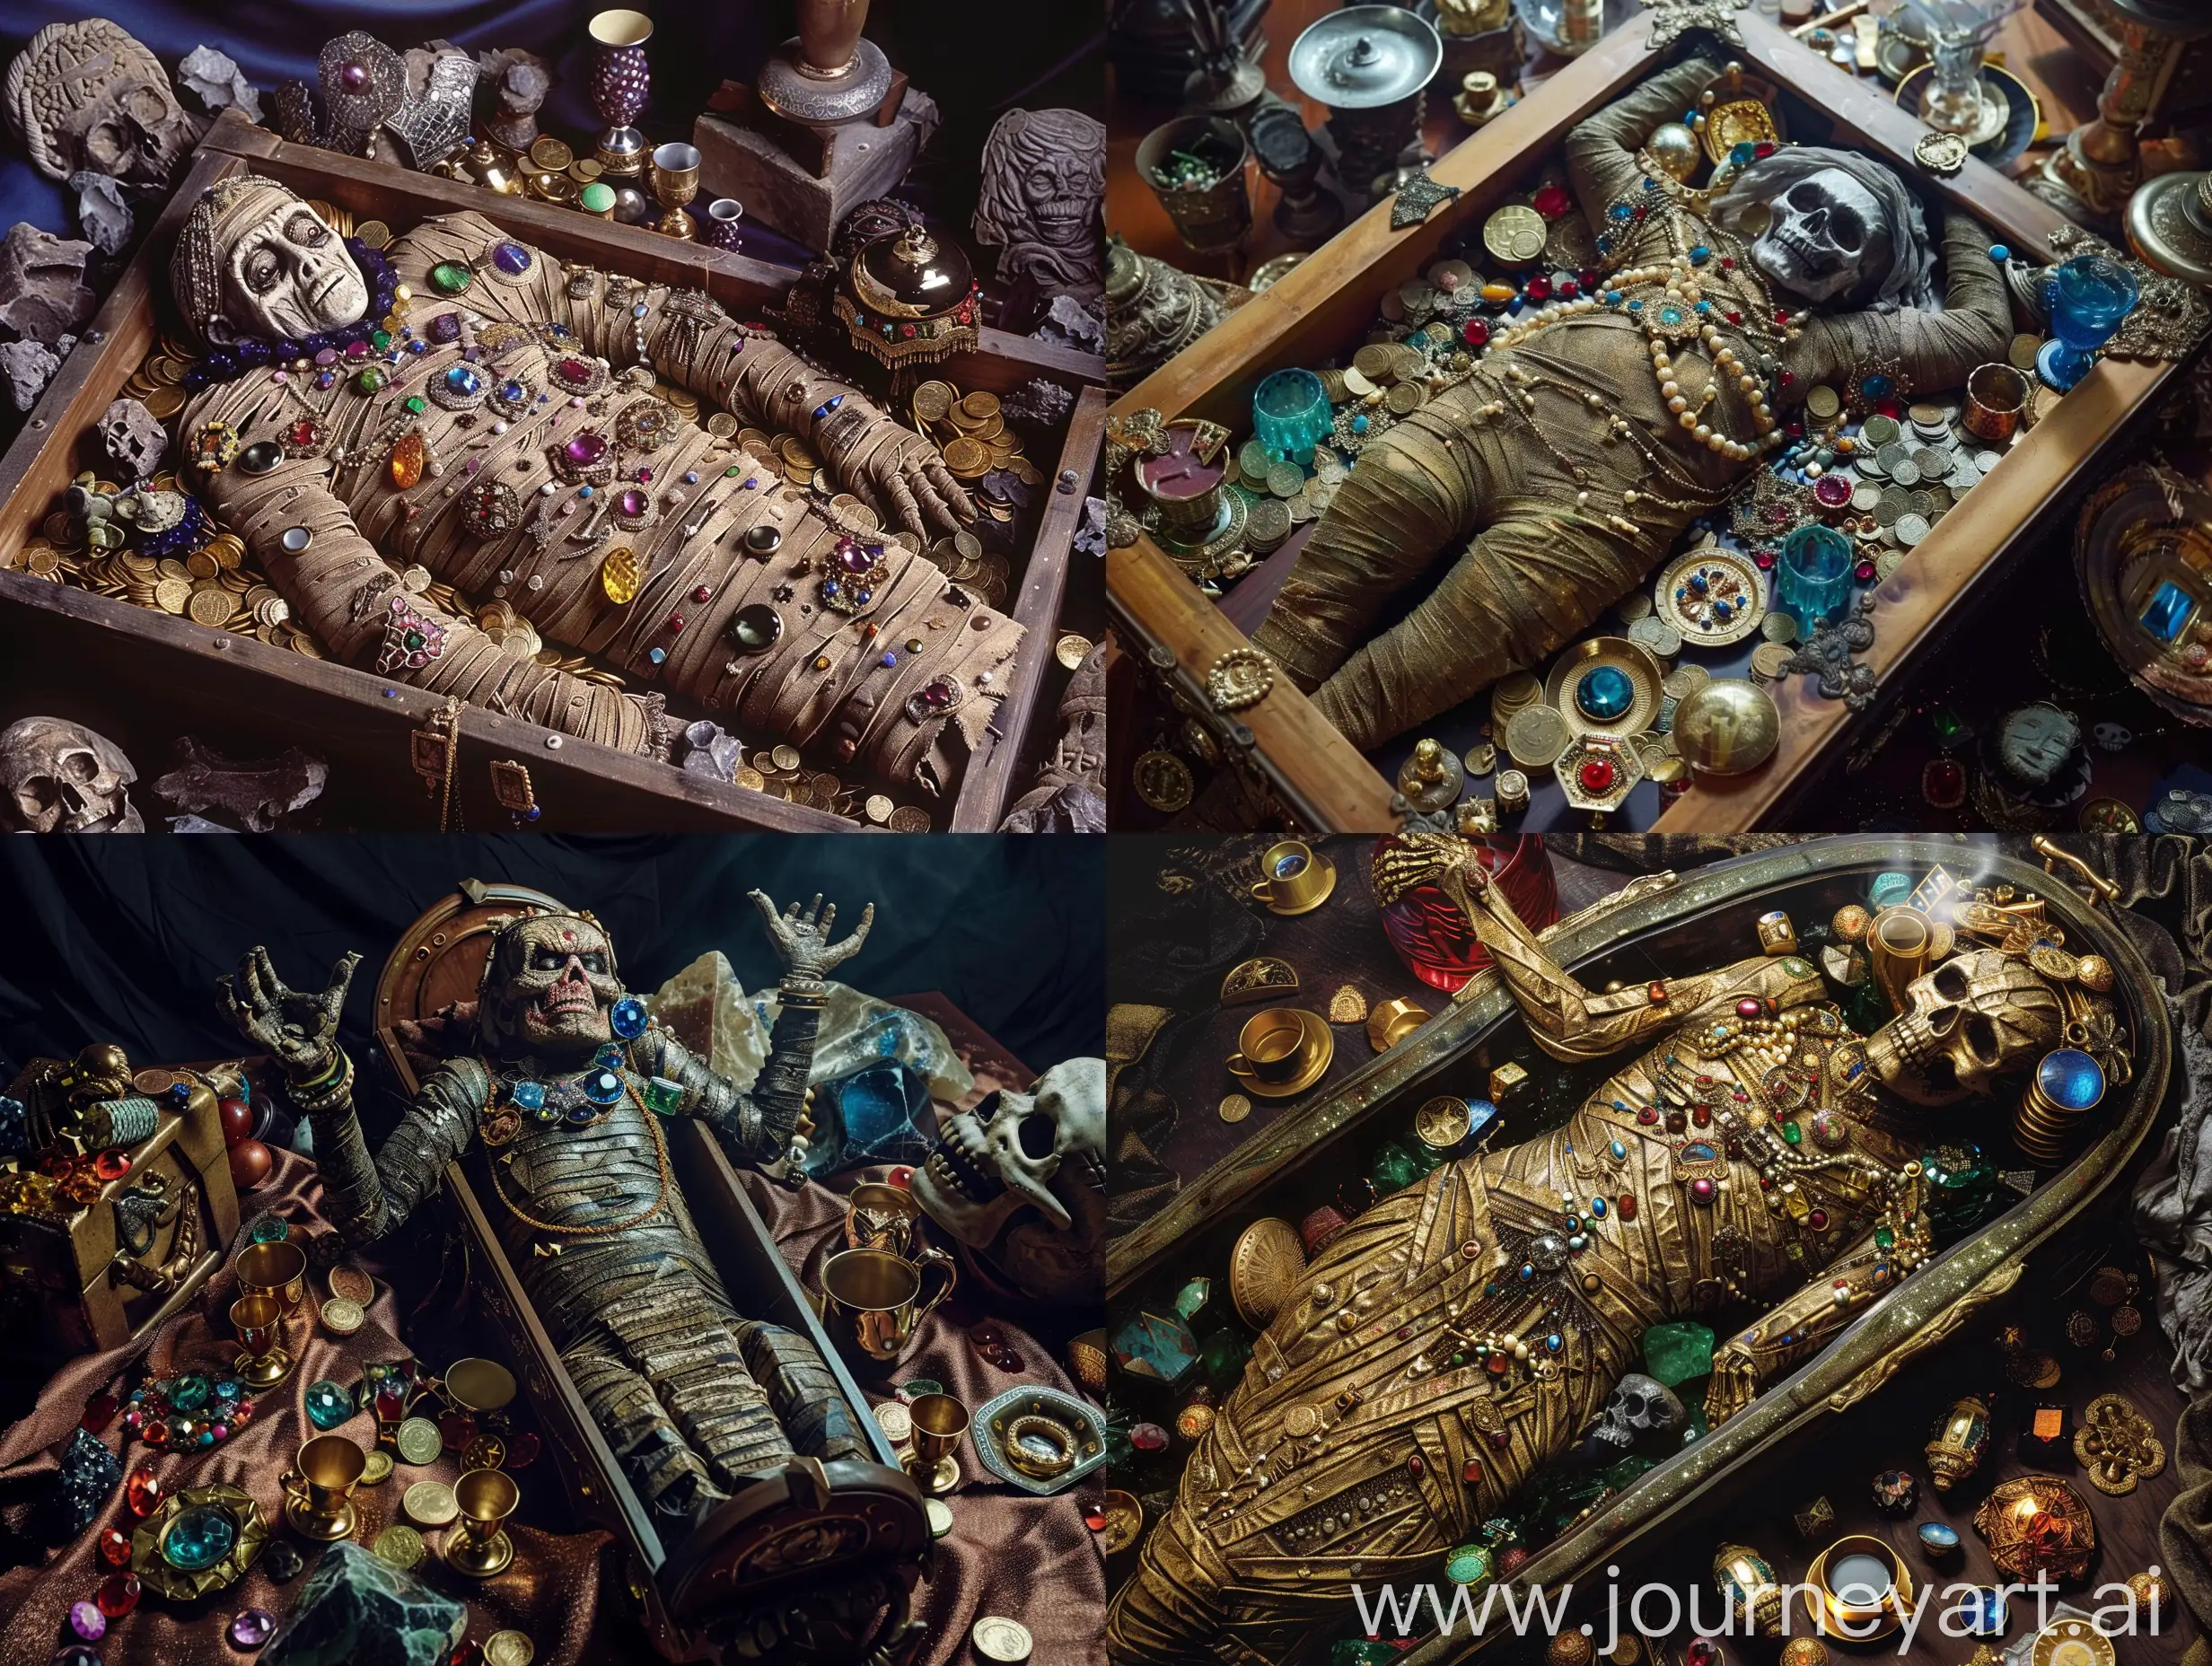 Ancient-Cursed-Mummy-with-Treasures-in-C-Coffin